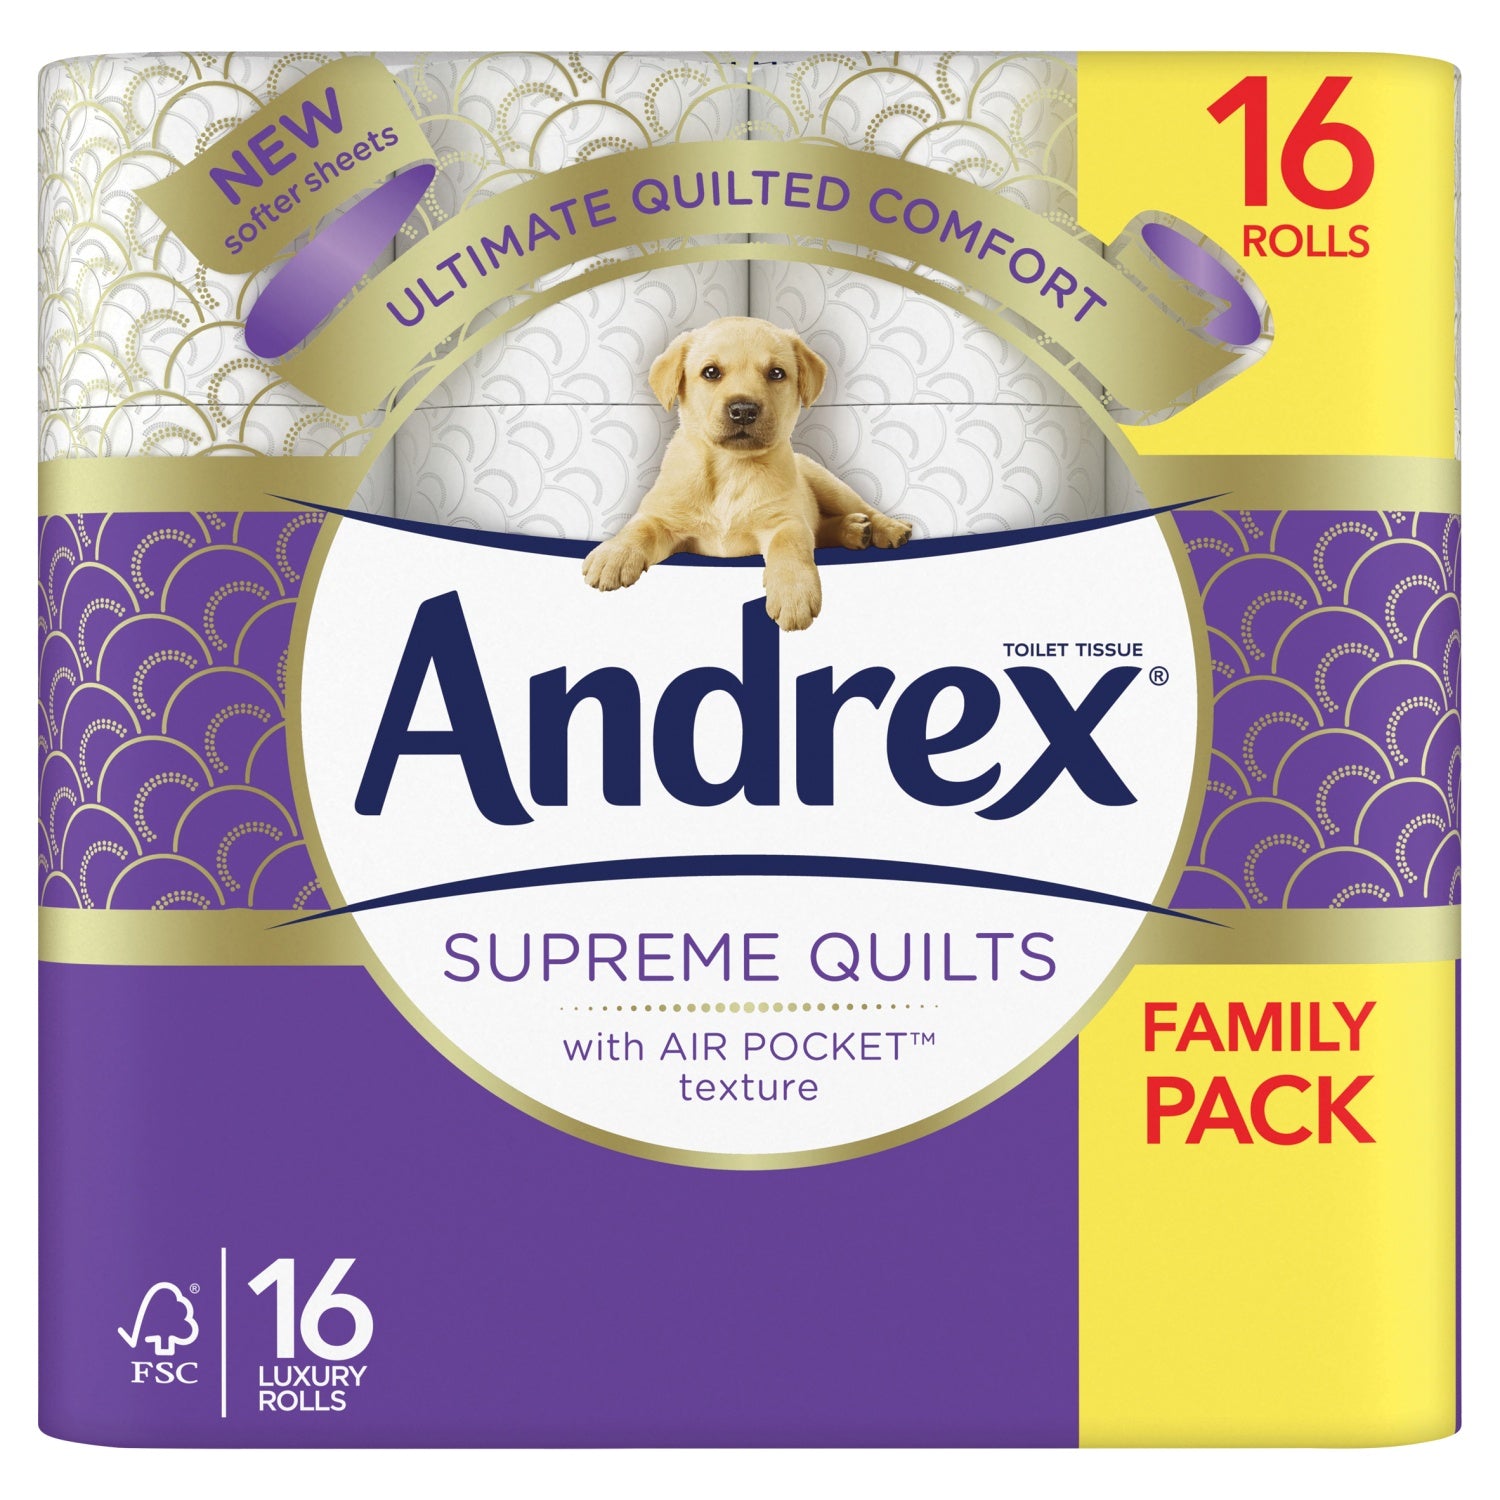 Andrex Supreme Quilts 16 Rolls Family Pk